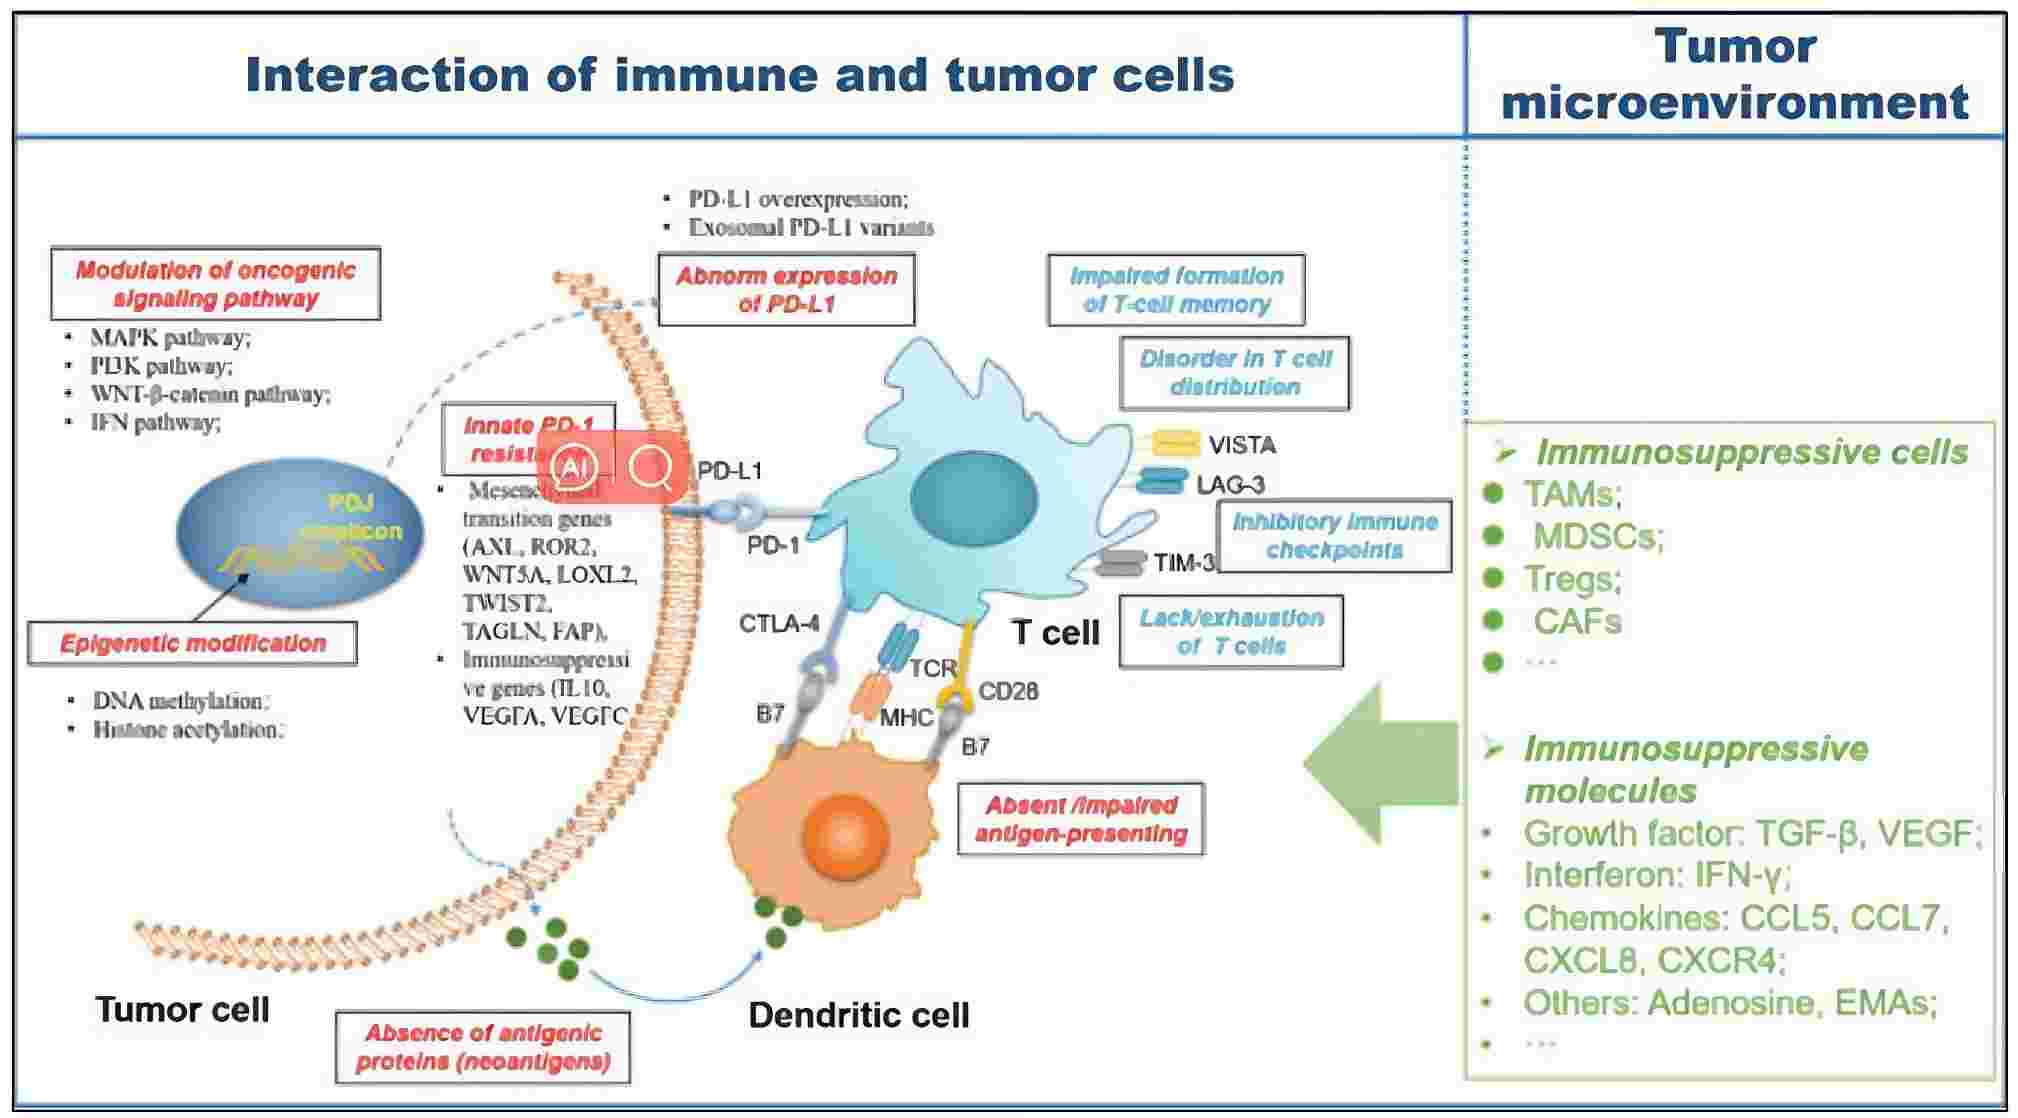 Immune checkpoint blockade resistance in cancer therapy. (Shi, et al., 2020)